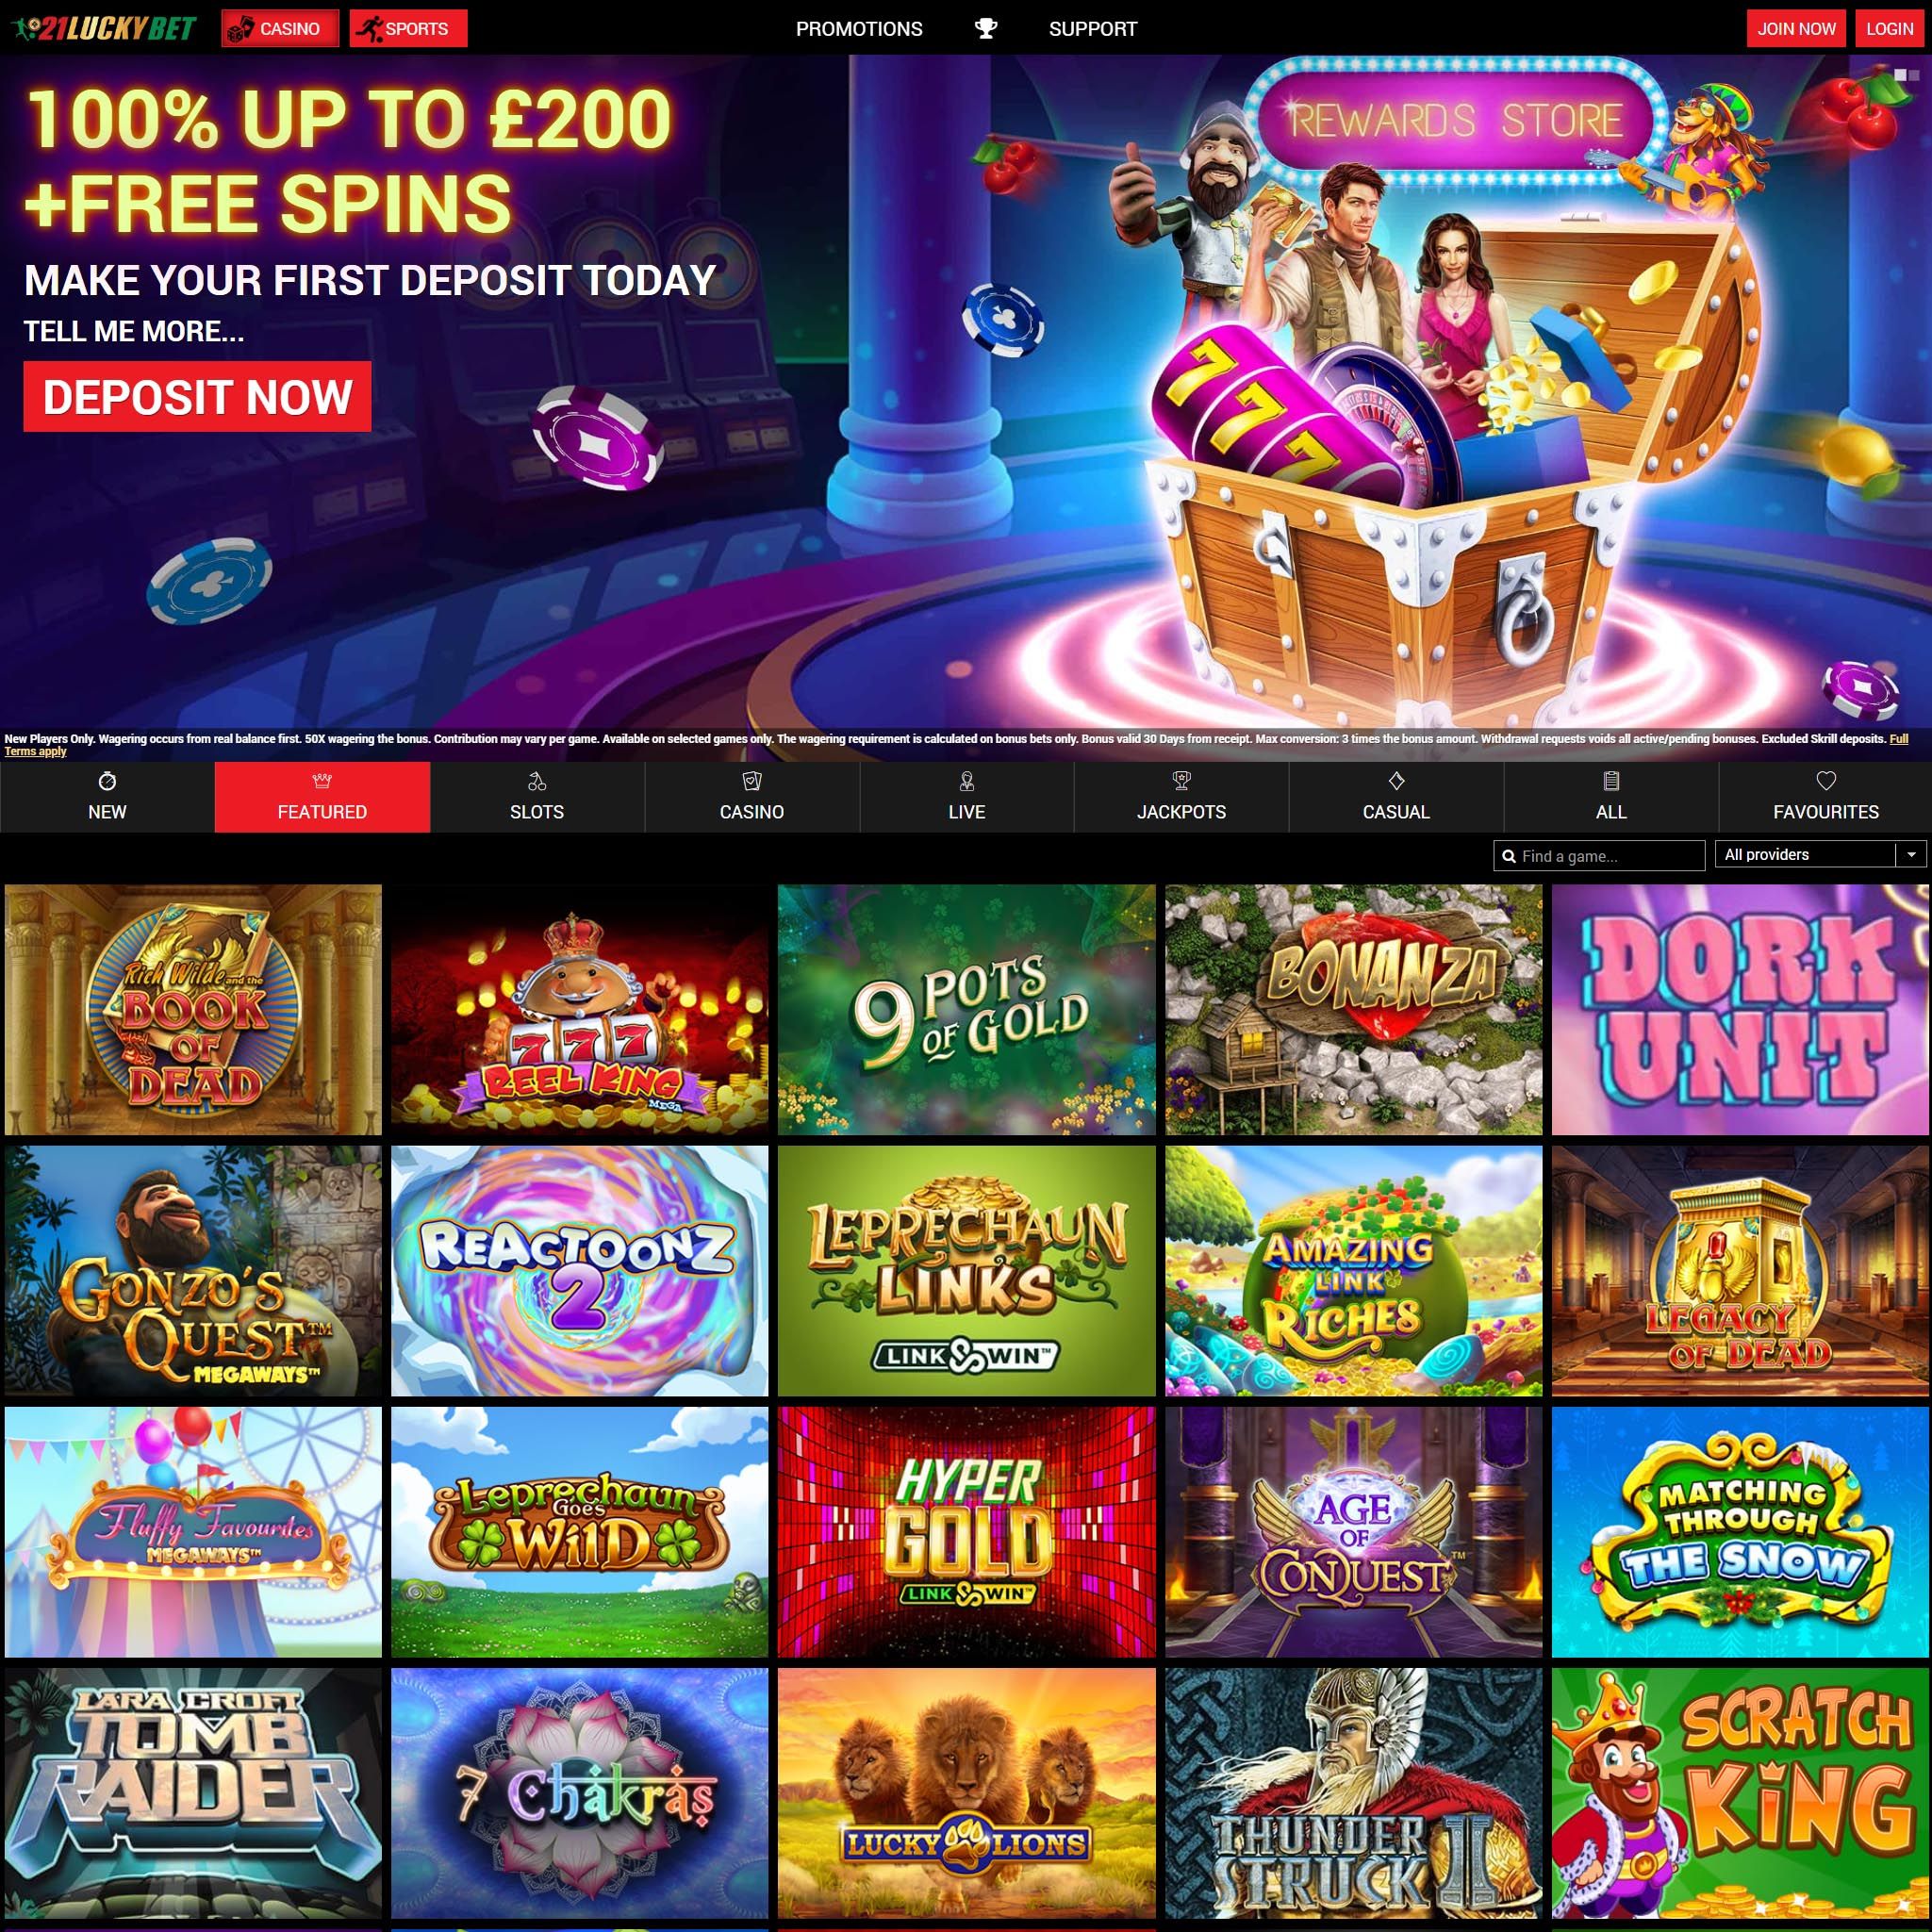 21luckybet review by Best Netent Casino